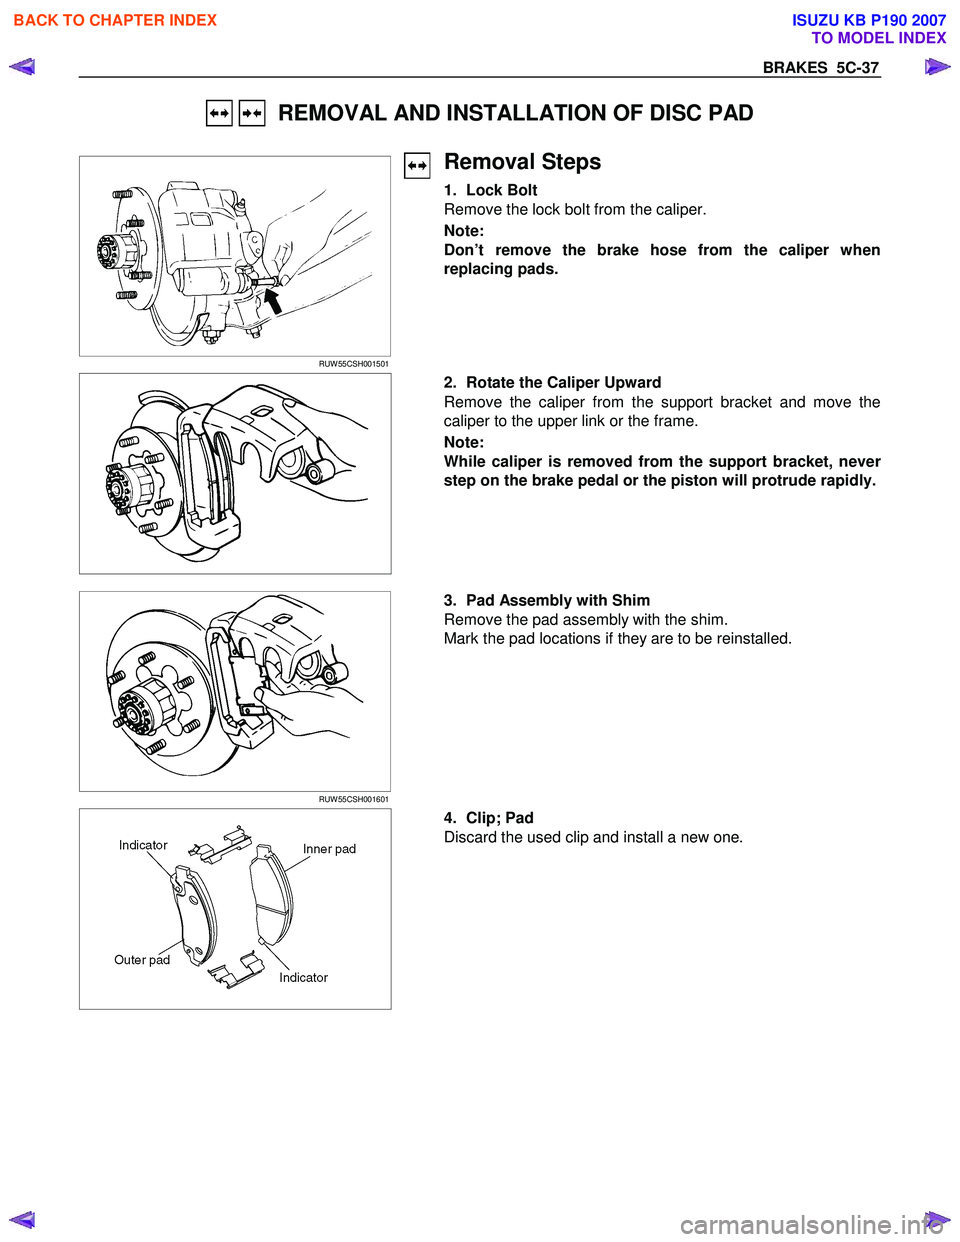 ISUZU KB P190 2007  Workshop Repair Manual BRAKES  5C-37 
   REMOVAL AND INSTALLATION OF DISC PAD 
 
 
 
 
RUW 55CSH001501 
 
Removal Steps 
1. Lock Bolt  
Remove the lock bolt from the caliper.  
Note:  
Don’t remove the brake hose from the